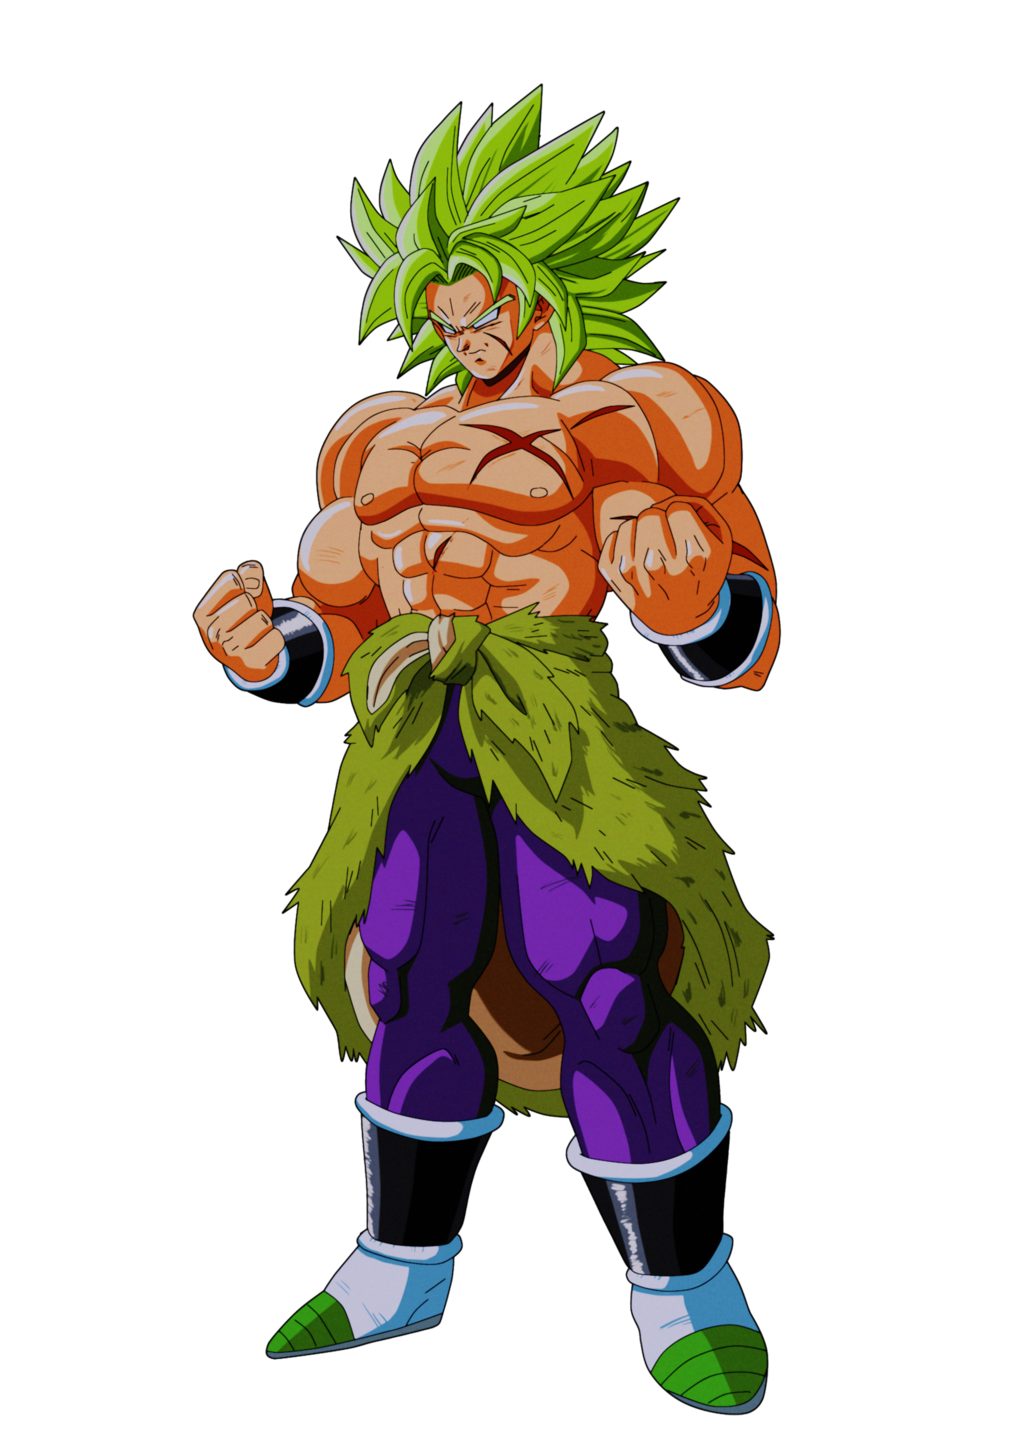 Renders Backgrounds LogoS: Broly Dragon ball Super